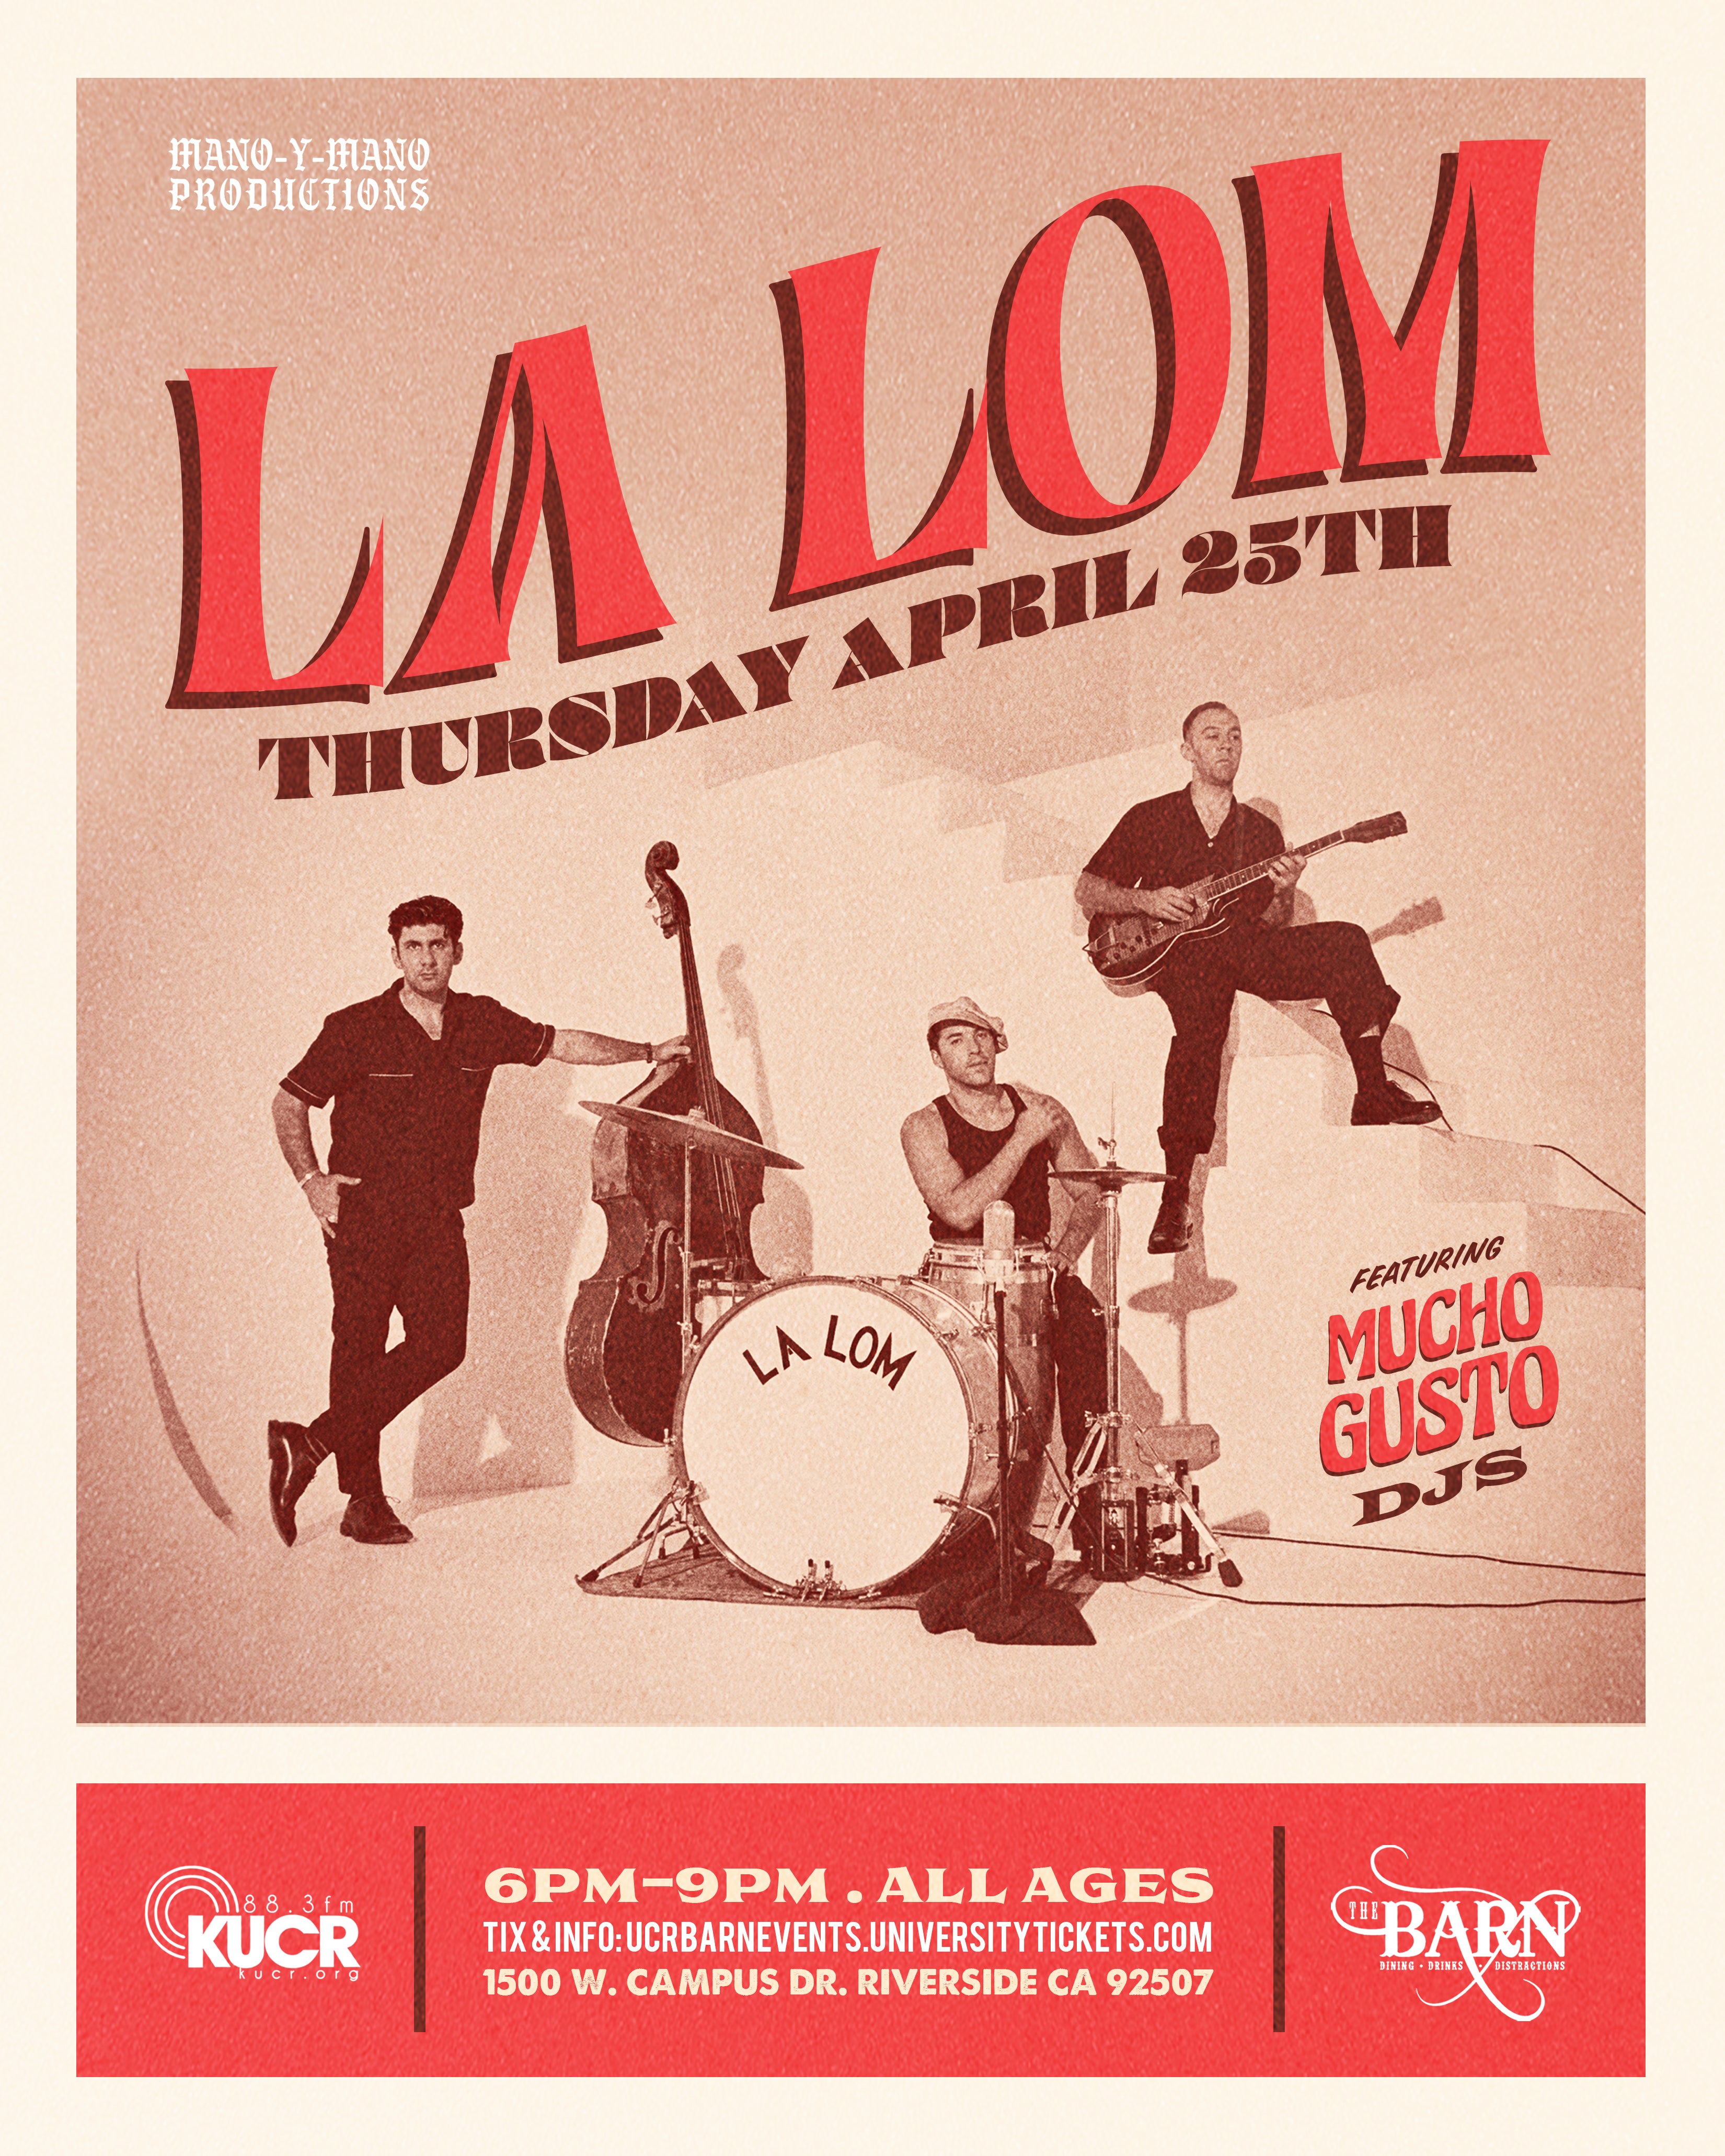 La Lom live at the Barn on April 25 from 6 pm to 9 pm. Featuring Mucho Gusto DJs. Tickets for all ages.